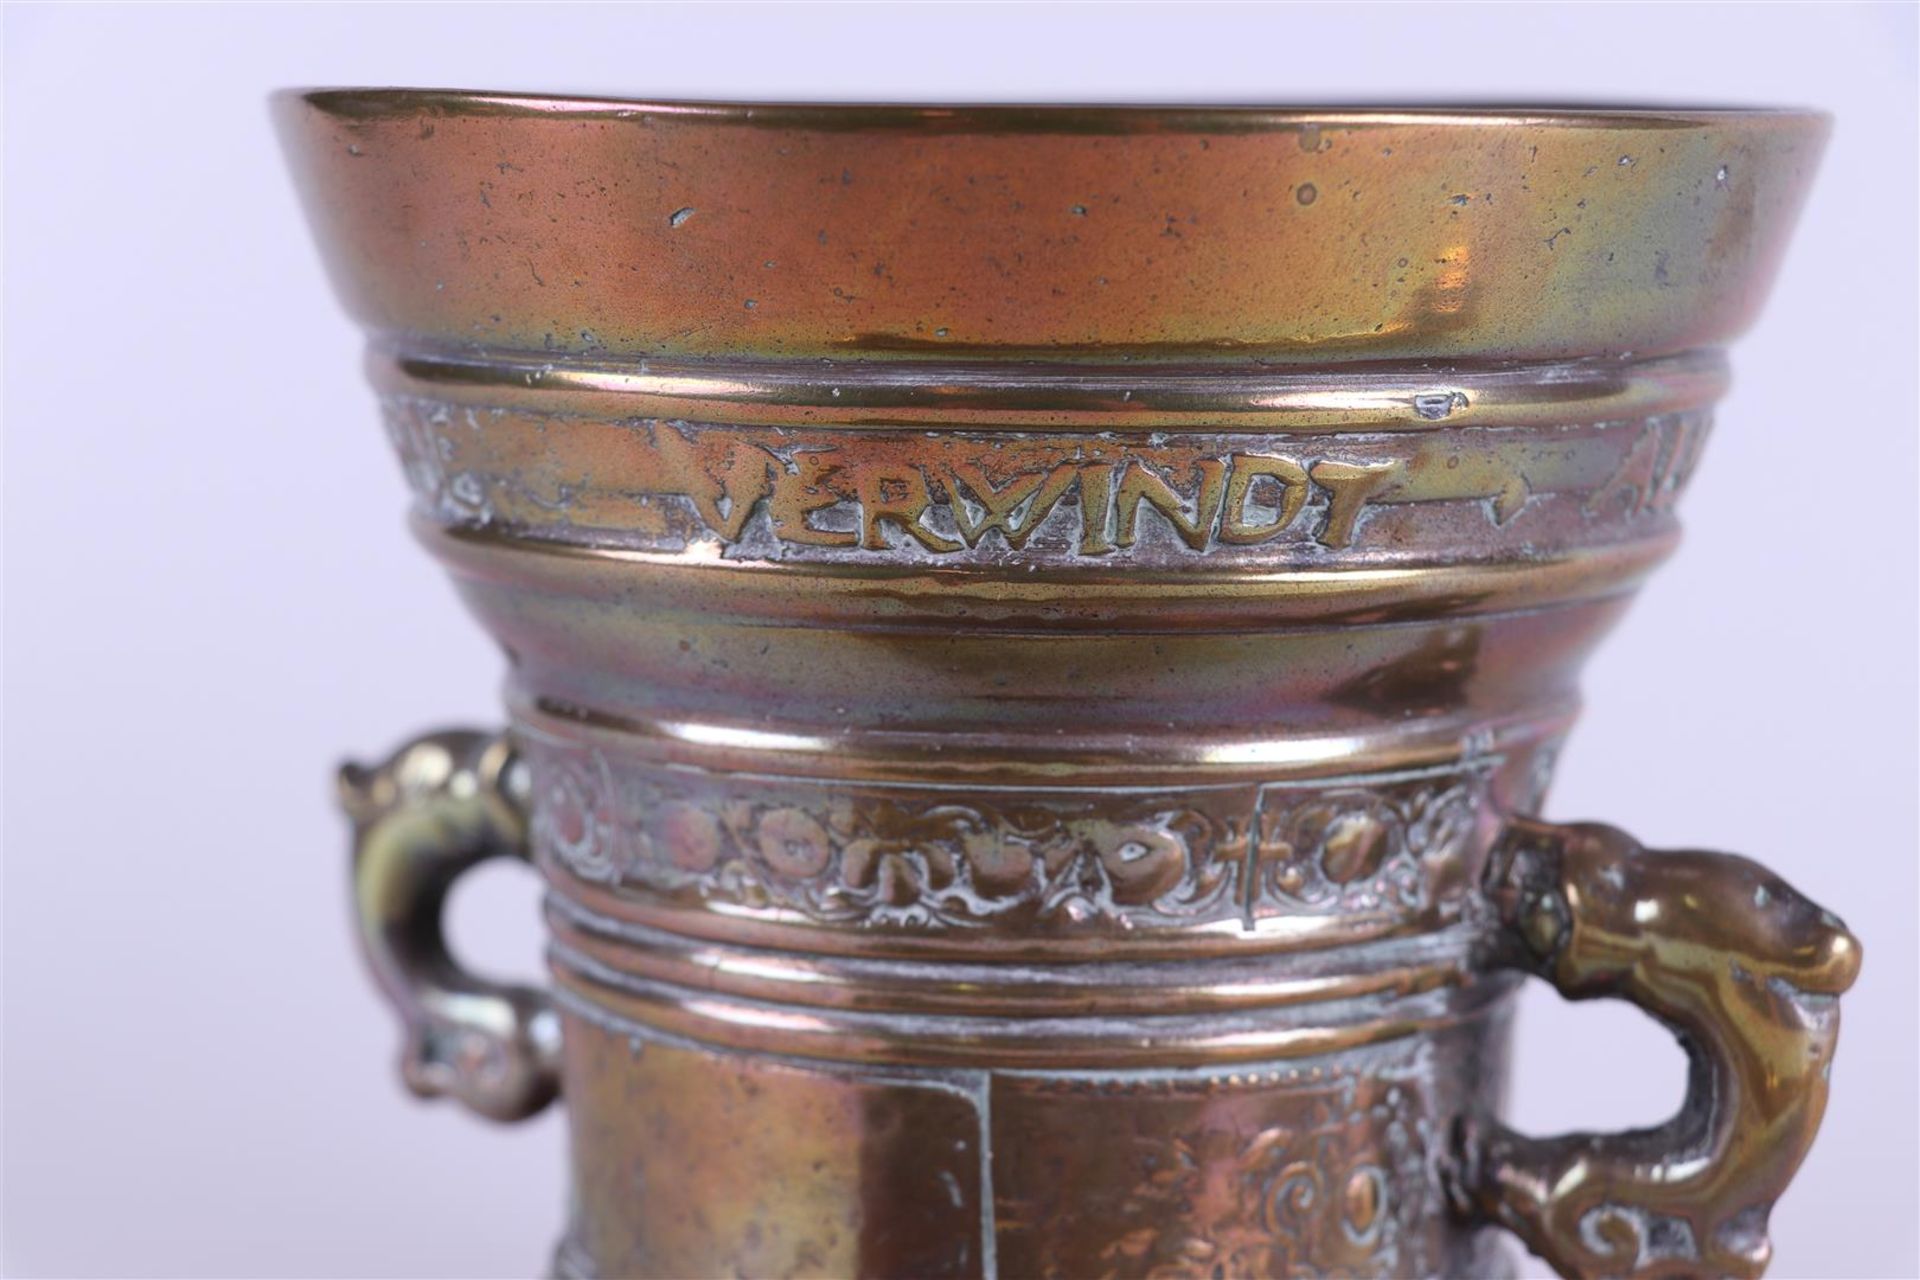 A bronze mortar with inscribed pestle; Love Verwindt alle Dingk A. 1629. with dolphin grips. Dutch p - Image 4 of 4